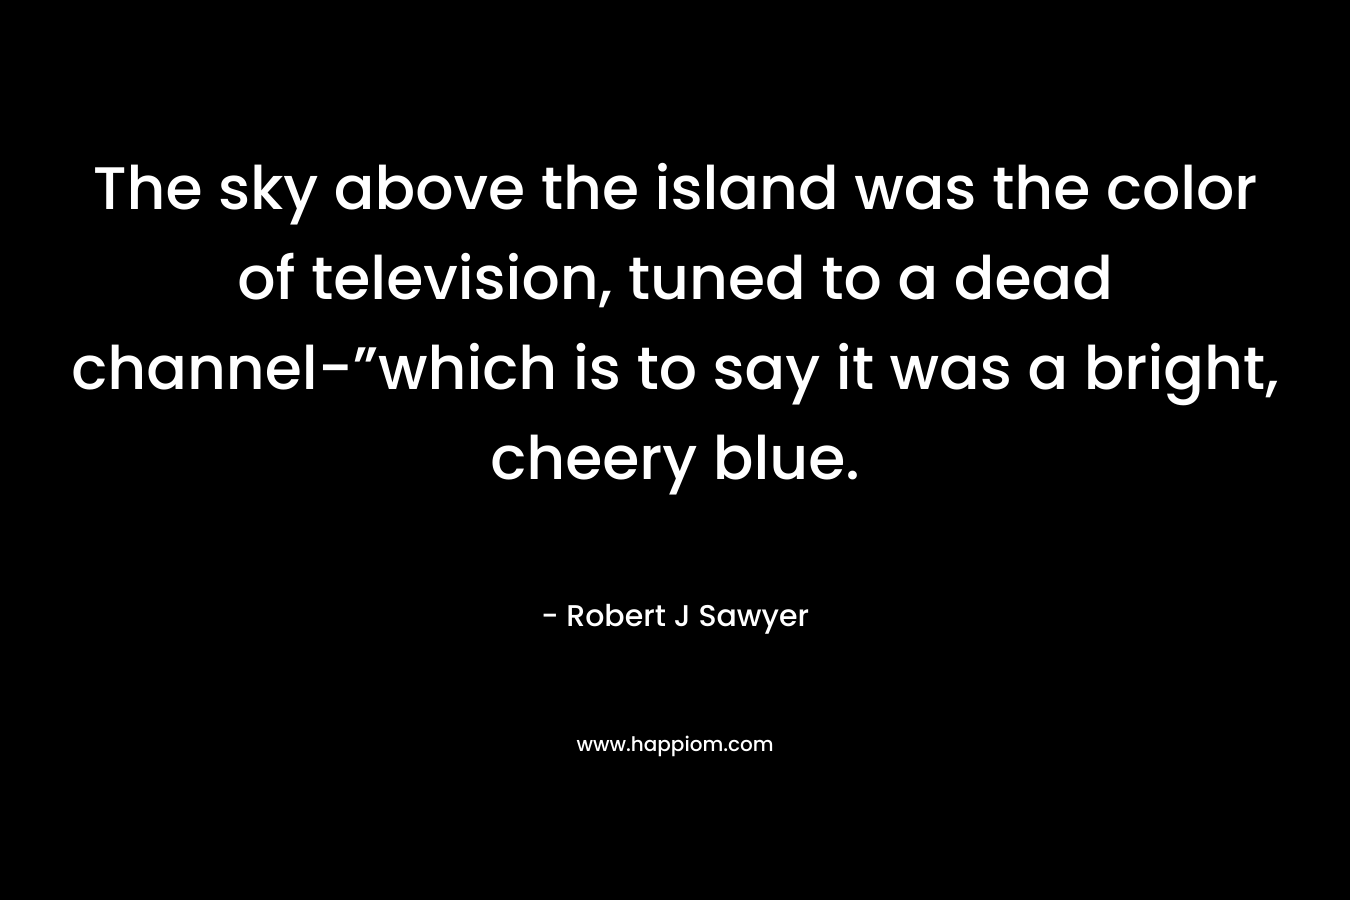 The sky above the island was the color of television, tuned to a dead channel-”which is to say it was a bright, cheery blue.